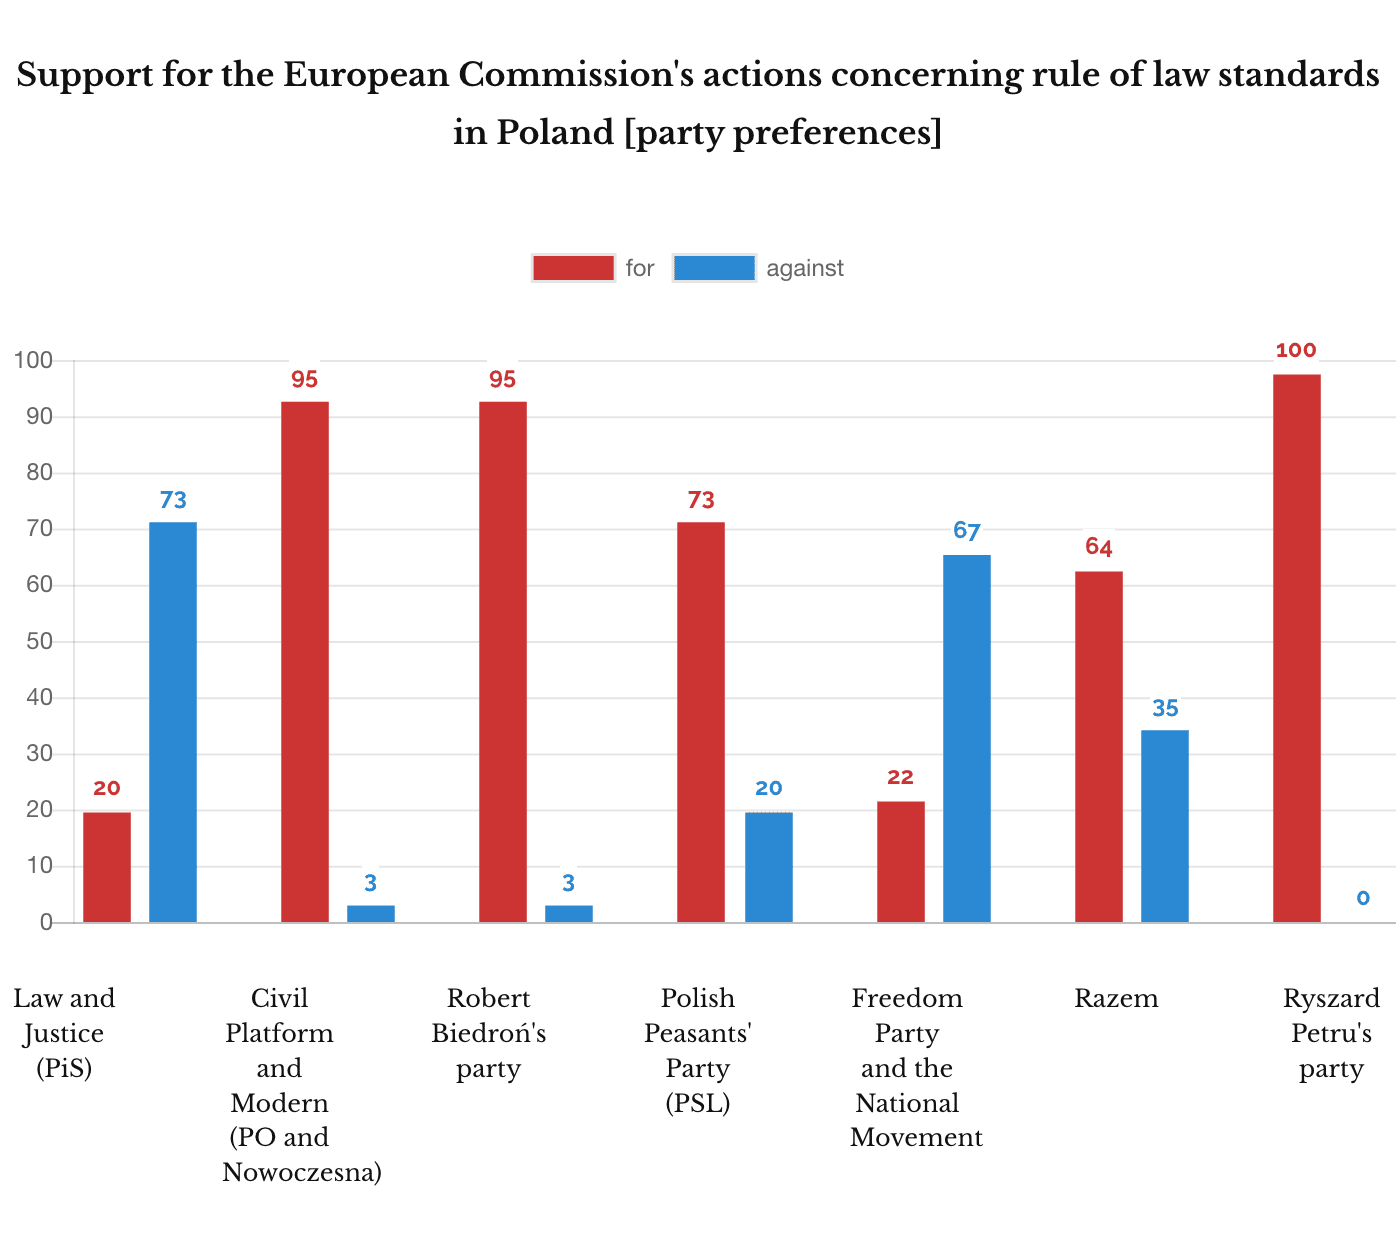 IPSOS December 2018. Support for the European Commission in rule of law dispute [party preferences]